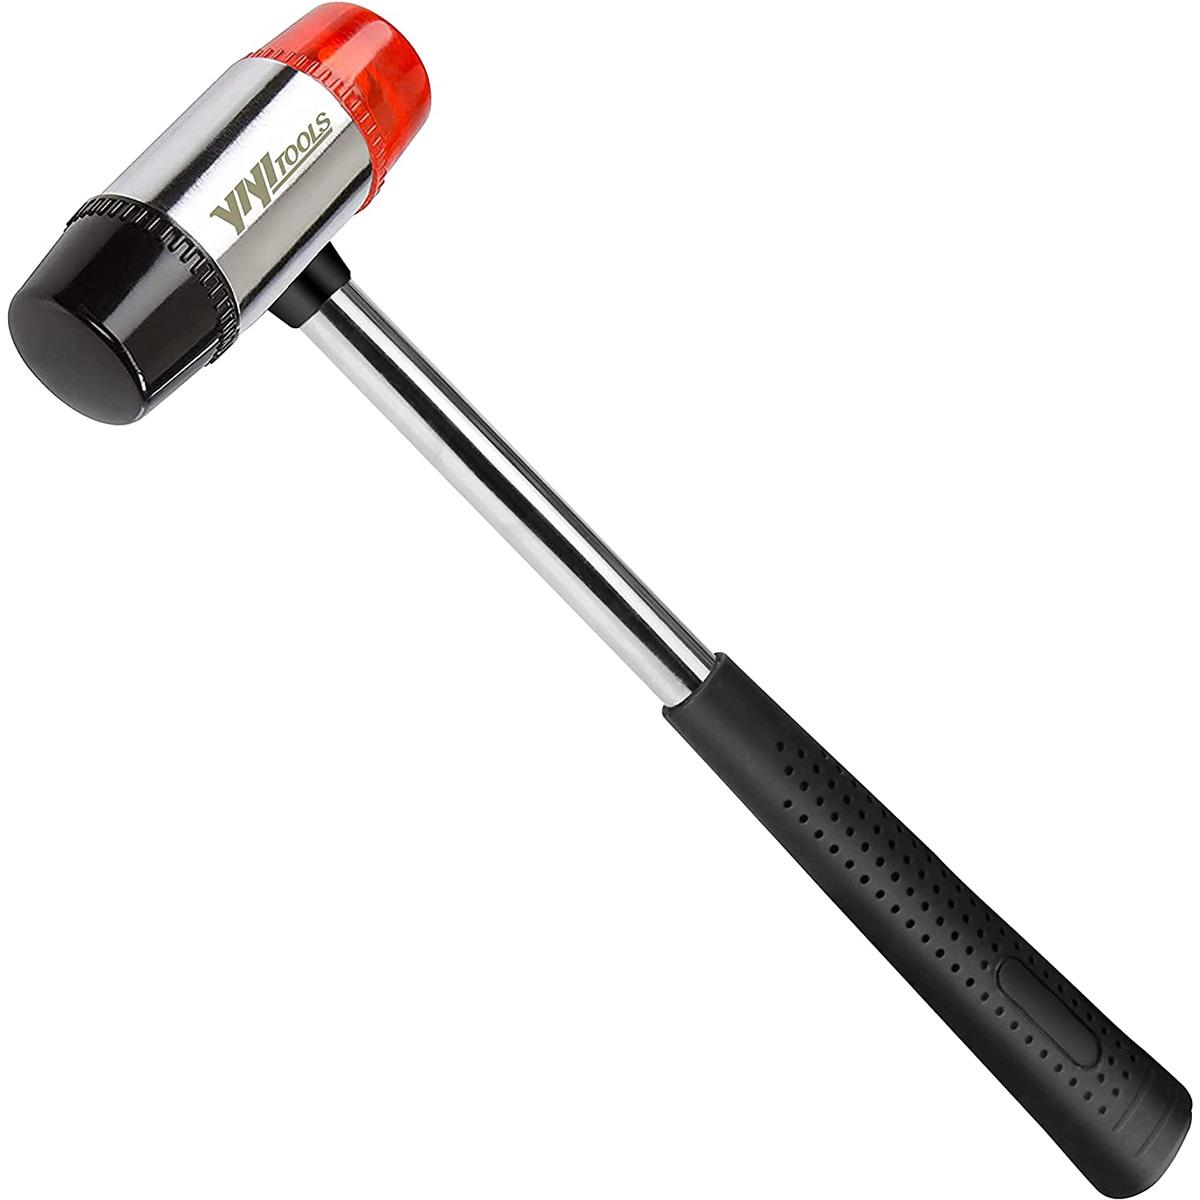 Double-Faced Soft Hammer for $5.37